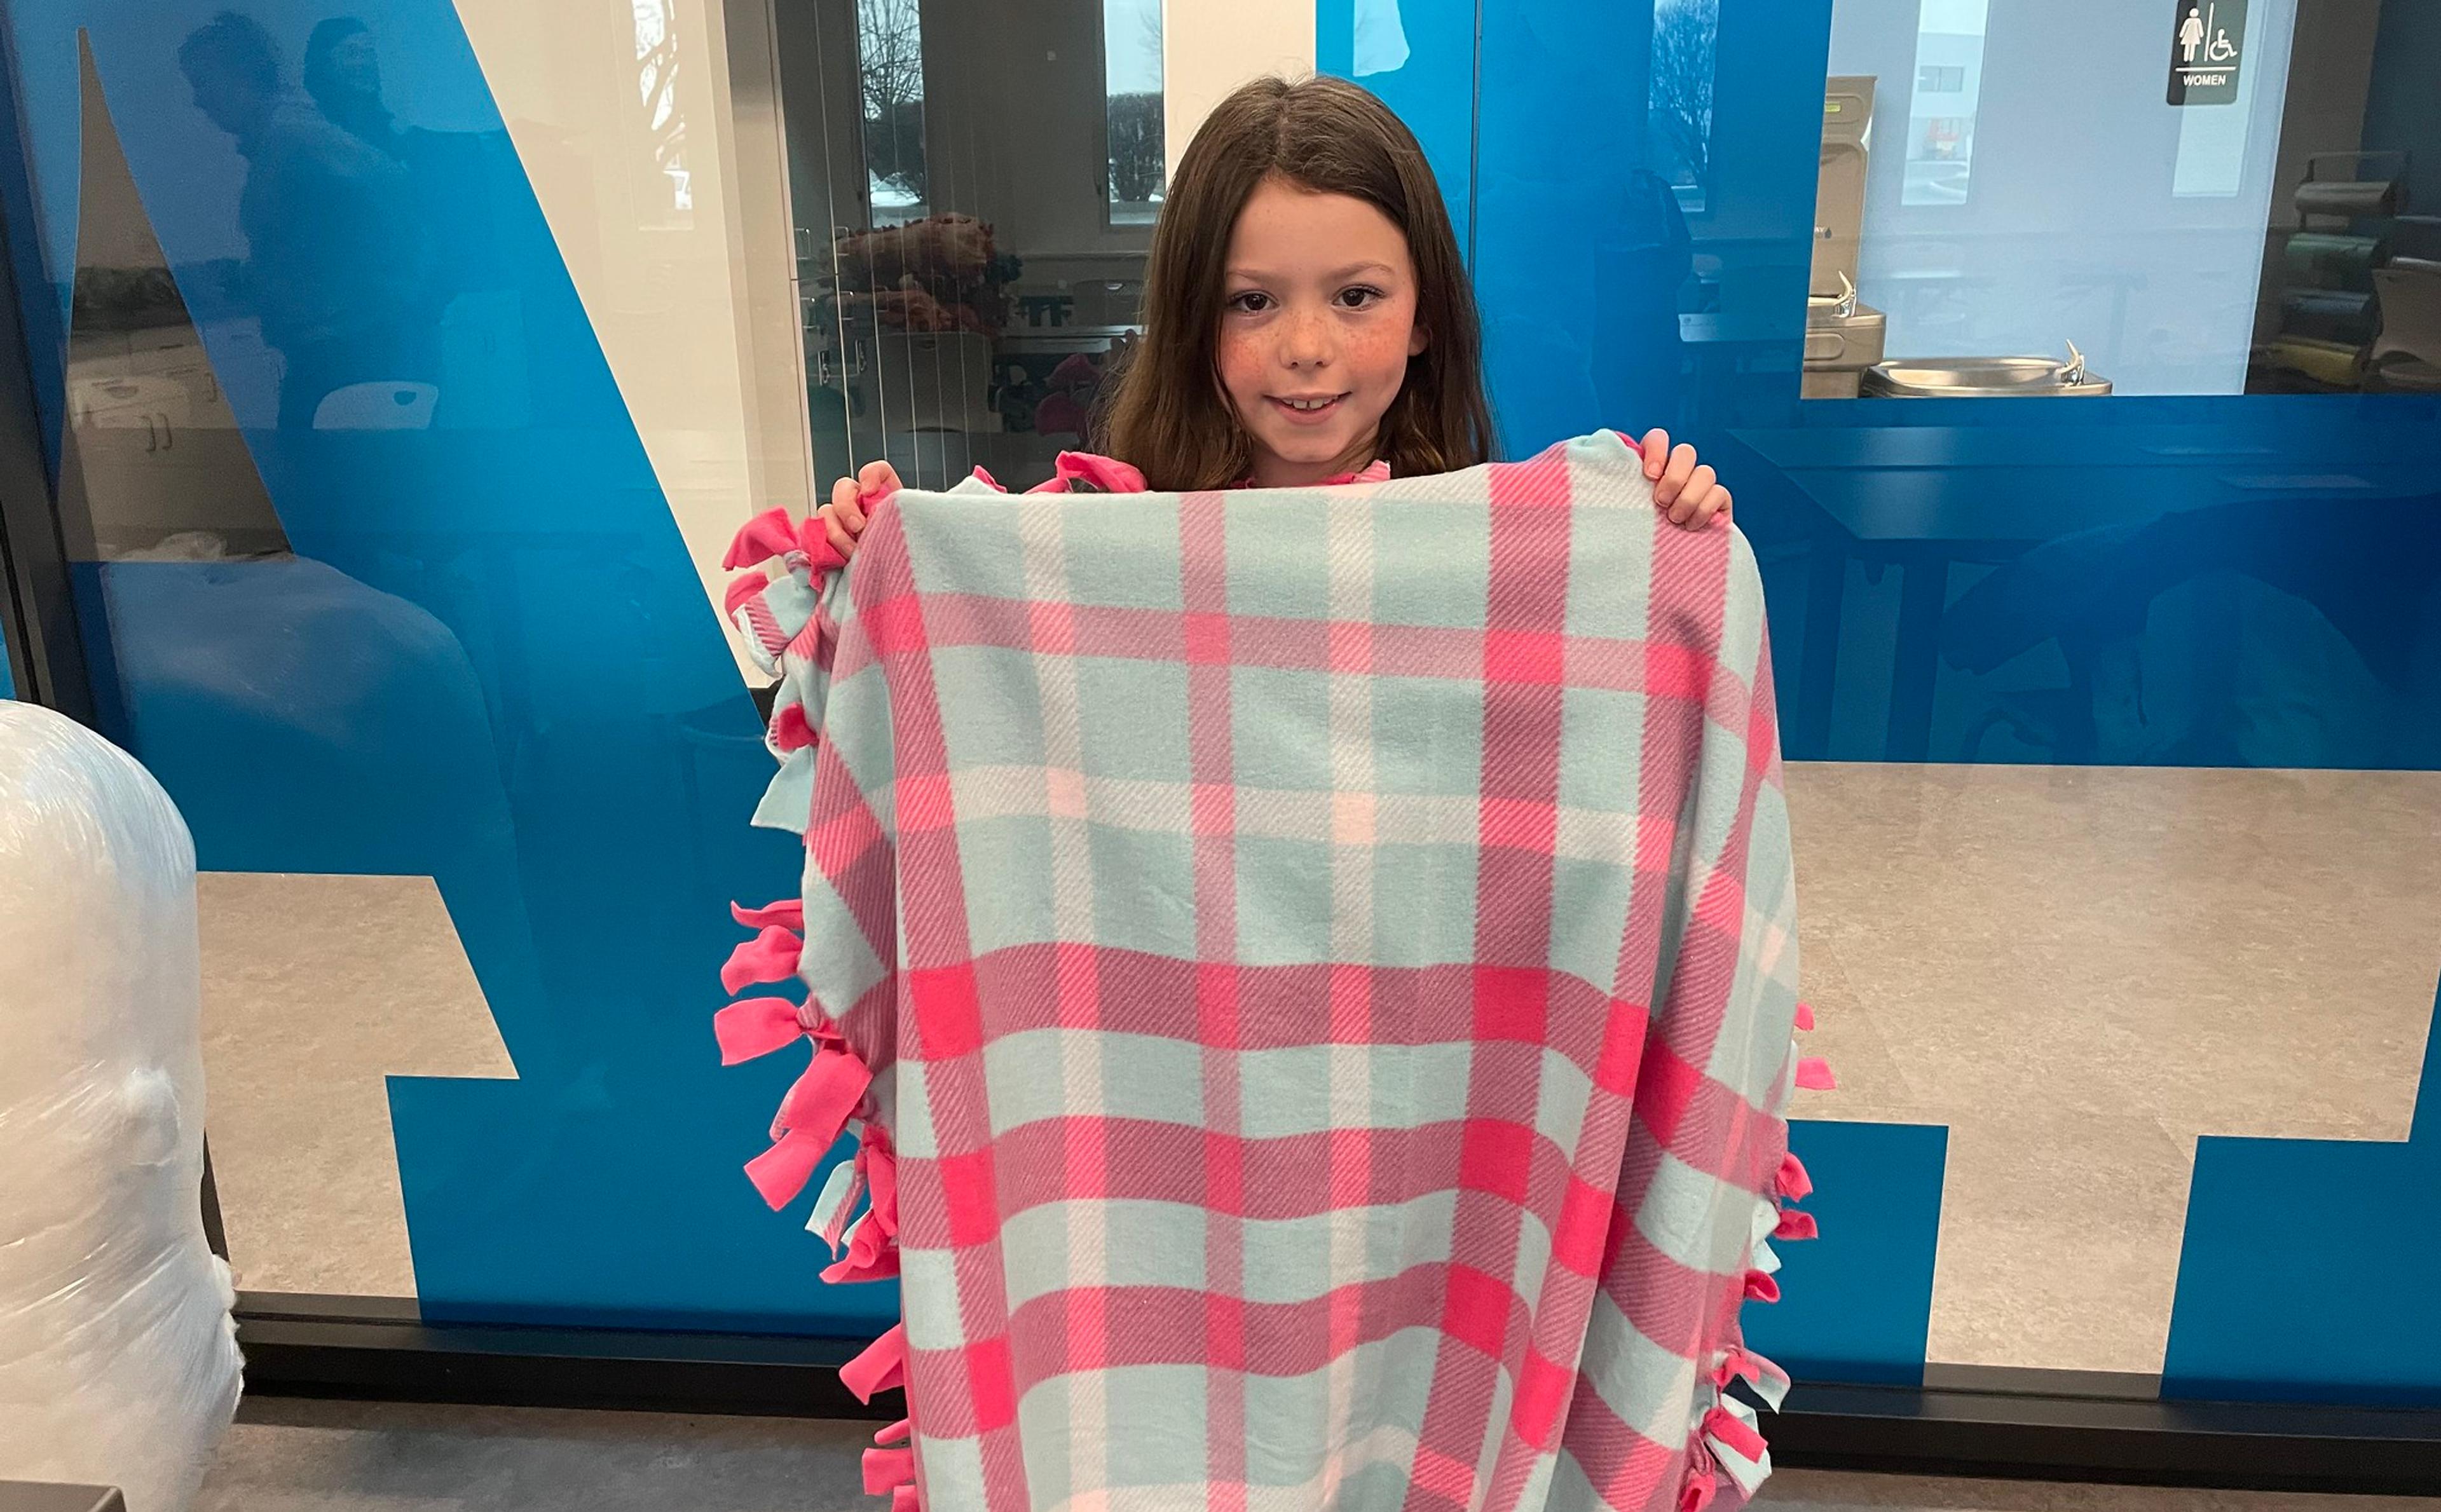 Young girl holds a pink and blue plaid blanket.